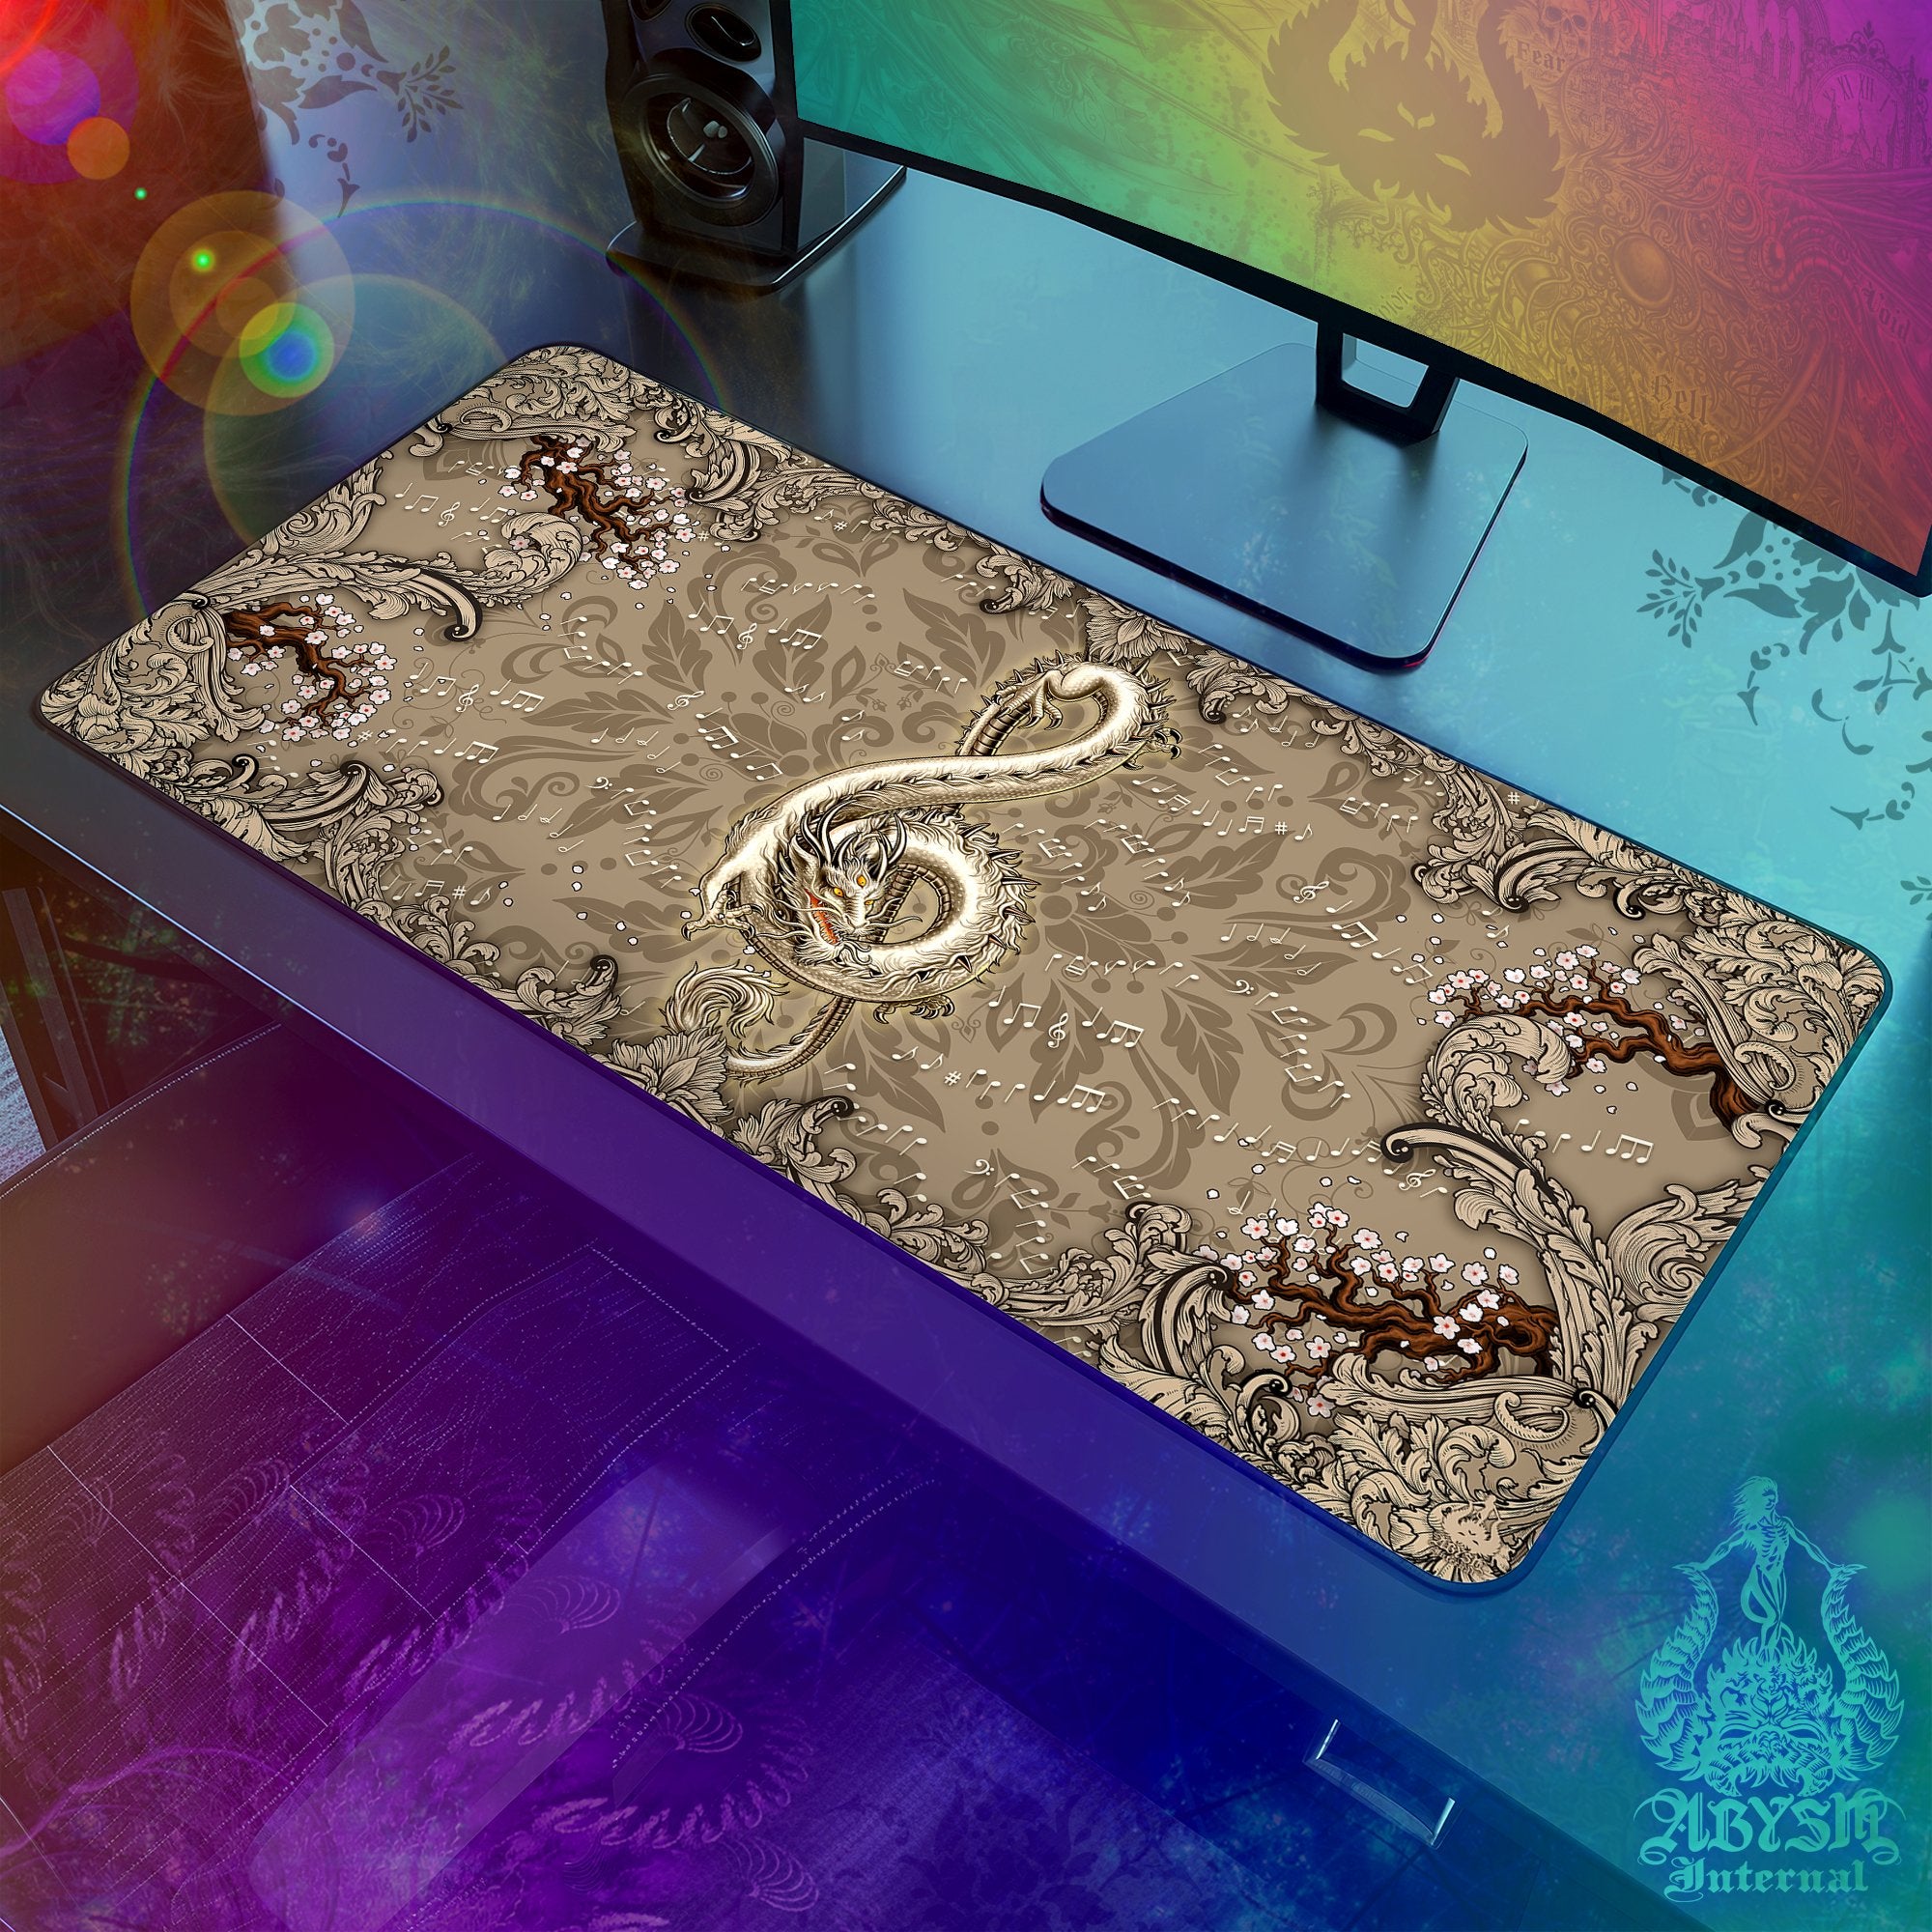 Music Workpad, Dragon Desk Mat, Asian Gaming Mouse Pad, Fantasy Table Protector Cover, Treble Clef Art Print - Cream, Violin, 2 Options - Abysm Internal